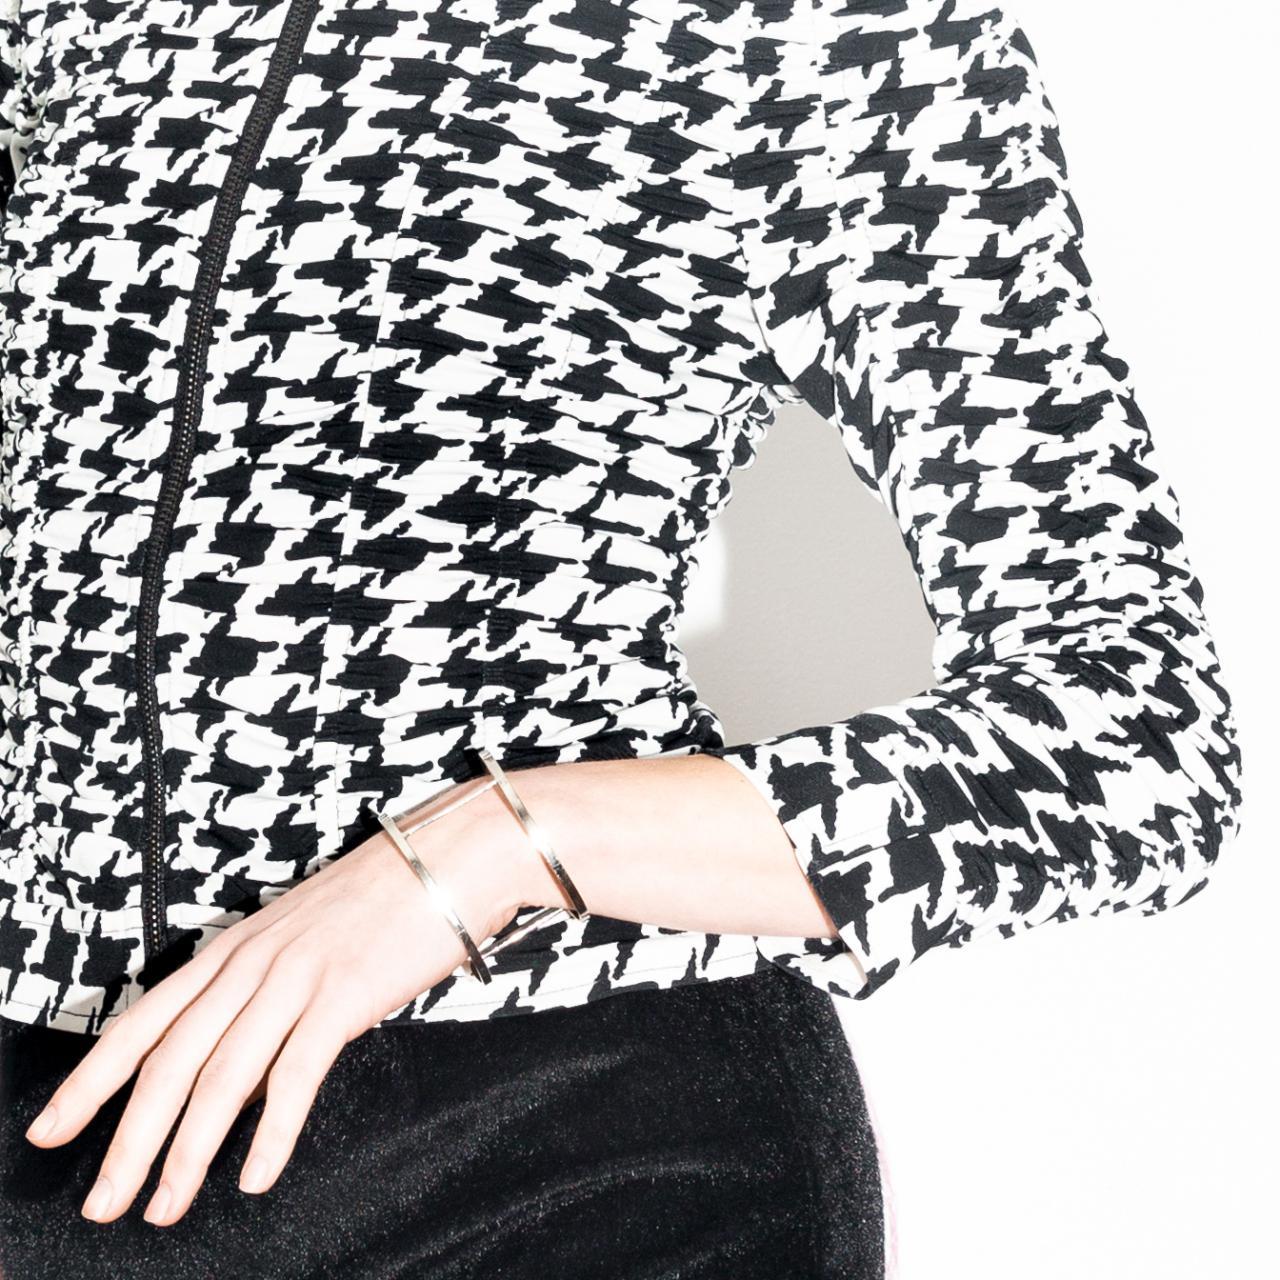 Product Image 3 - Black and white houndstooth patterned